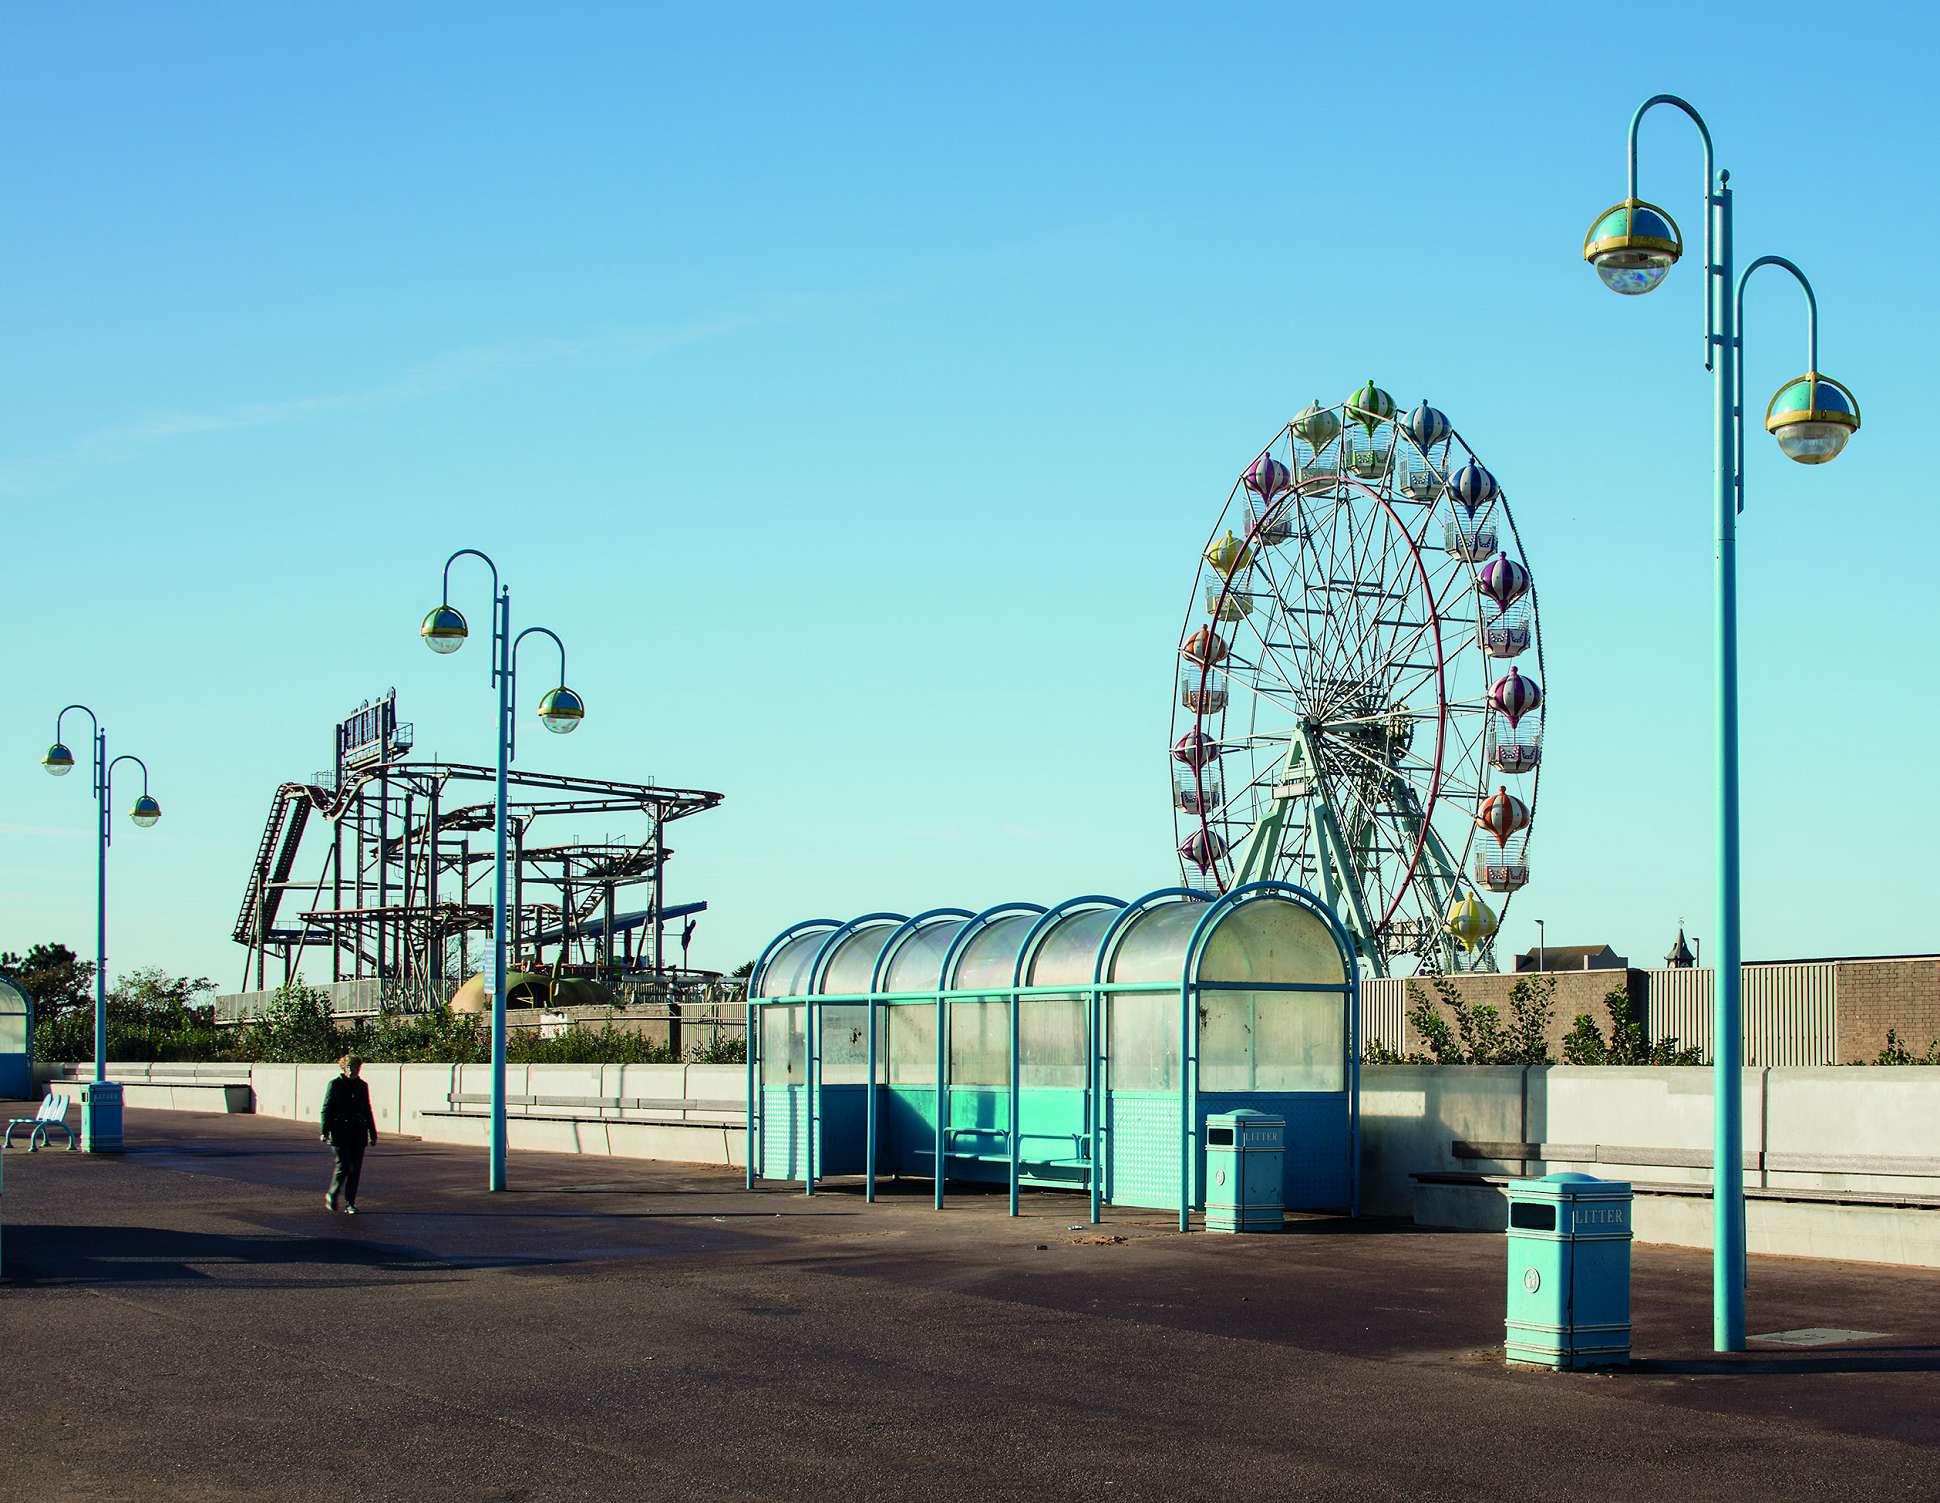 The Esplanade and Tower Gardens in Skegness where Billy Butlin opened his first Butlin’s holiday camp in 1936 were protected in November 2017.